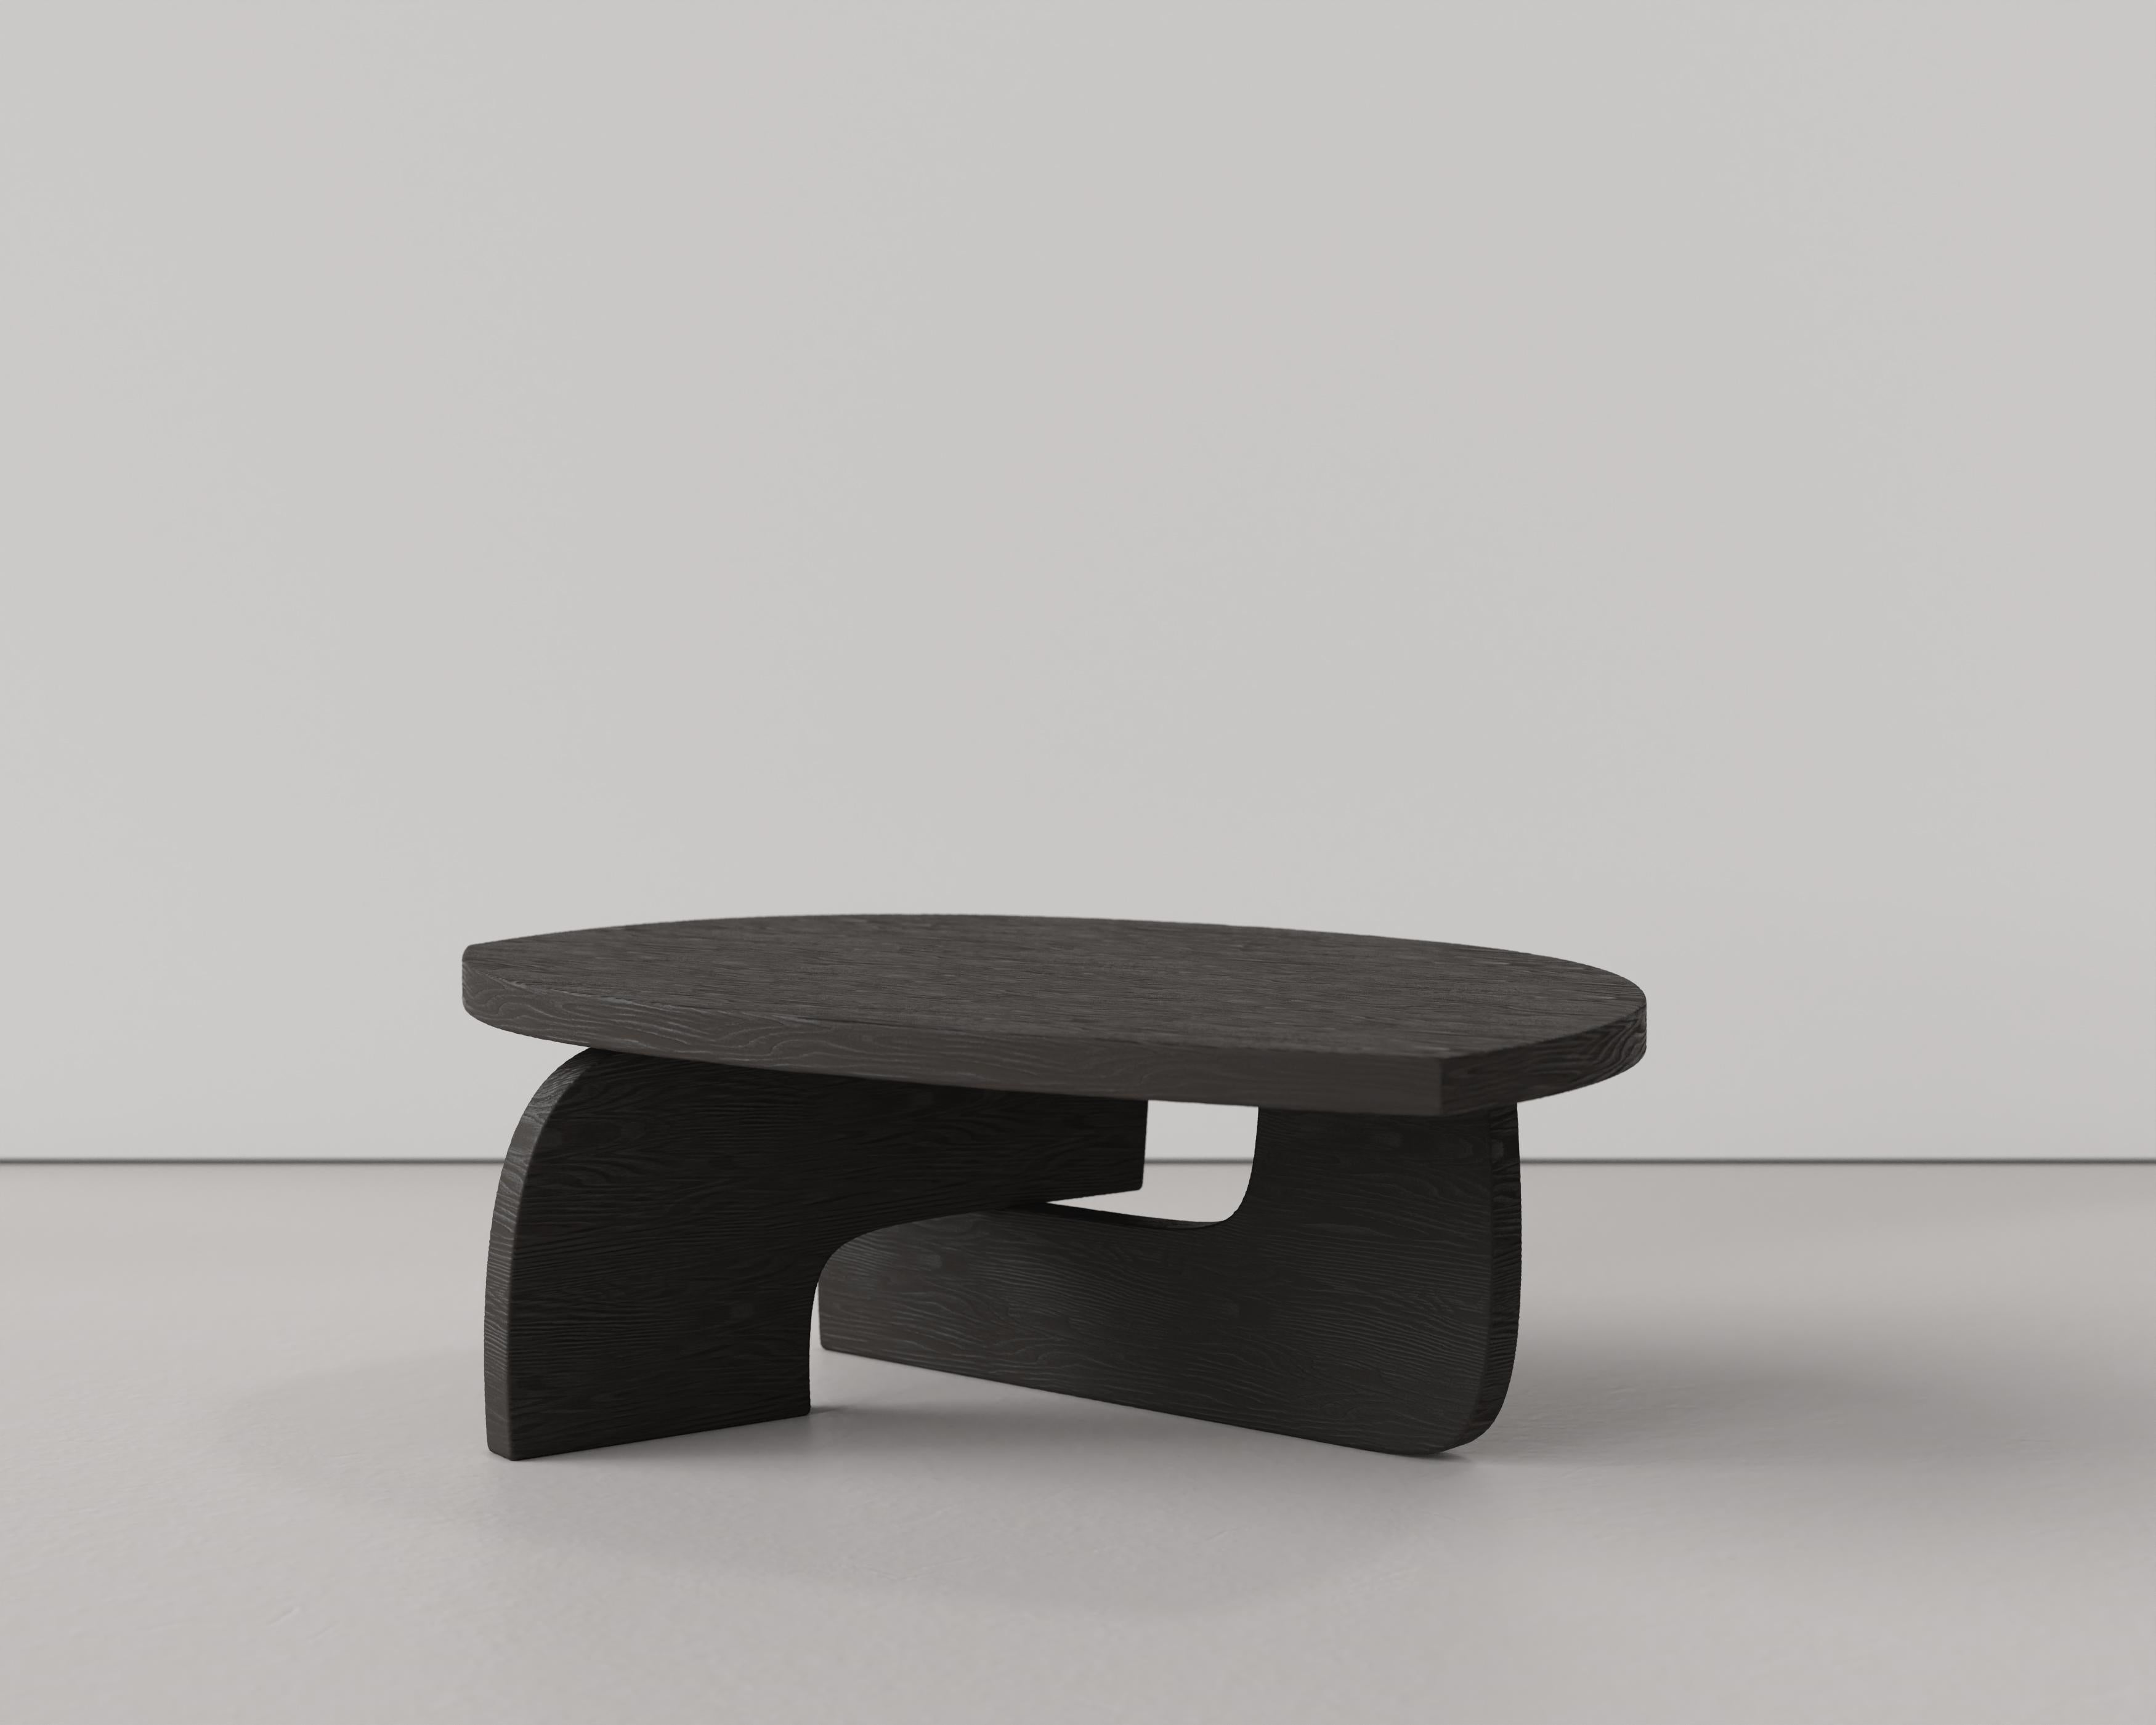 Woodwork Contemporary Limited Edition Charred Low Table, Reef V3 by Edizione Limitata For Sale